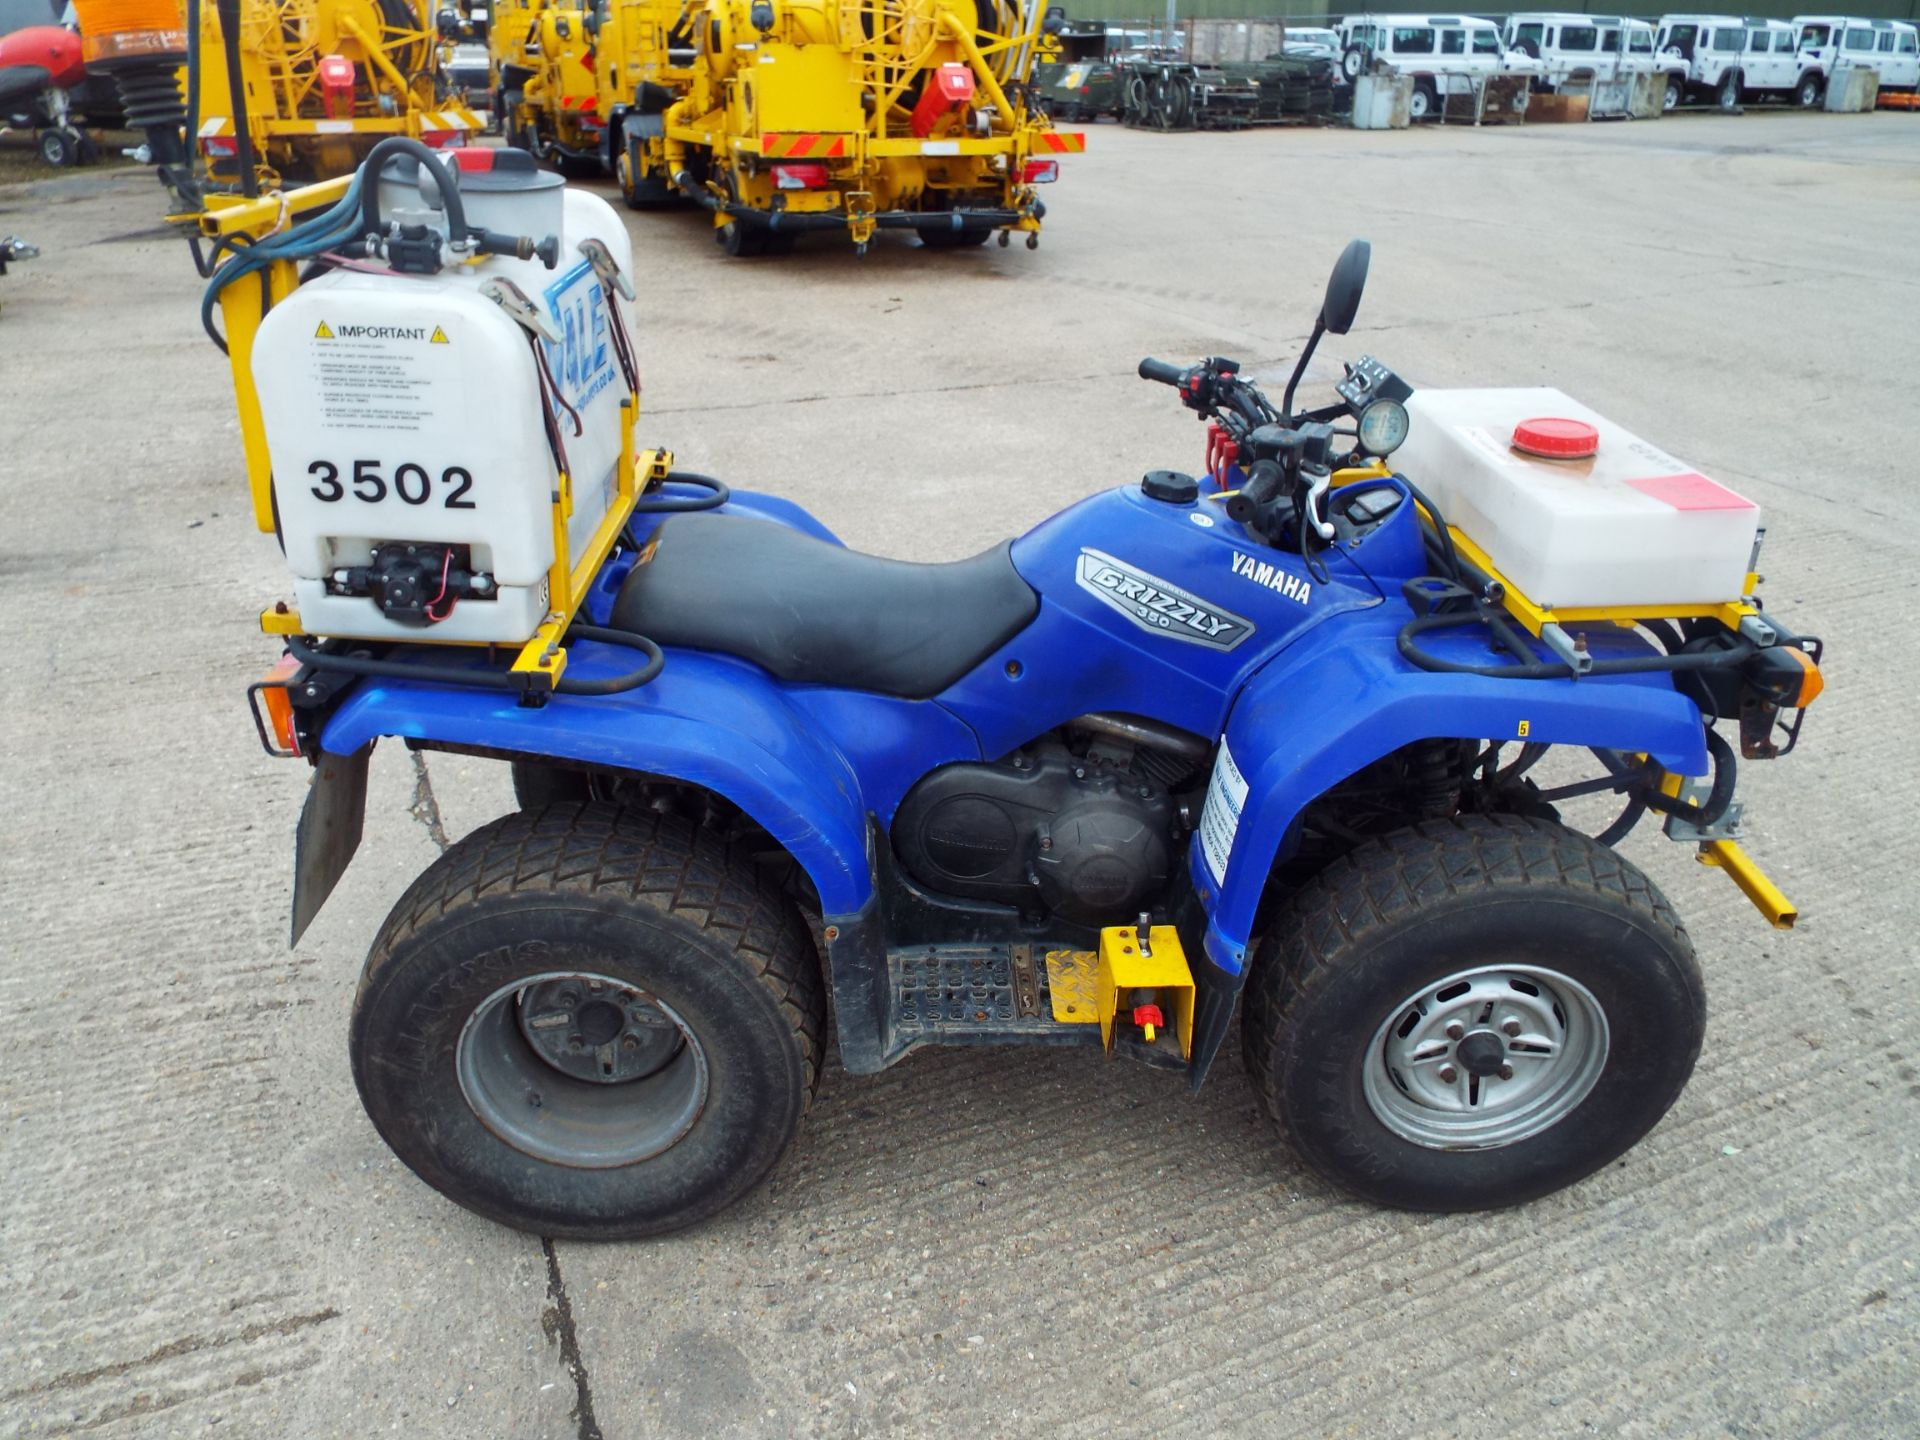 2008 Yamaha Grizzly 350 Ultramatic Quad Bike fitted with Vale Front/Rear Spraying Equipment - Bild 8 aus 26